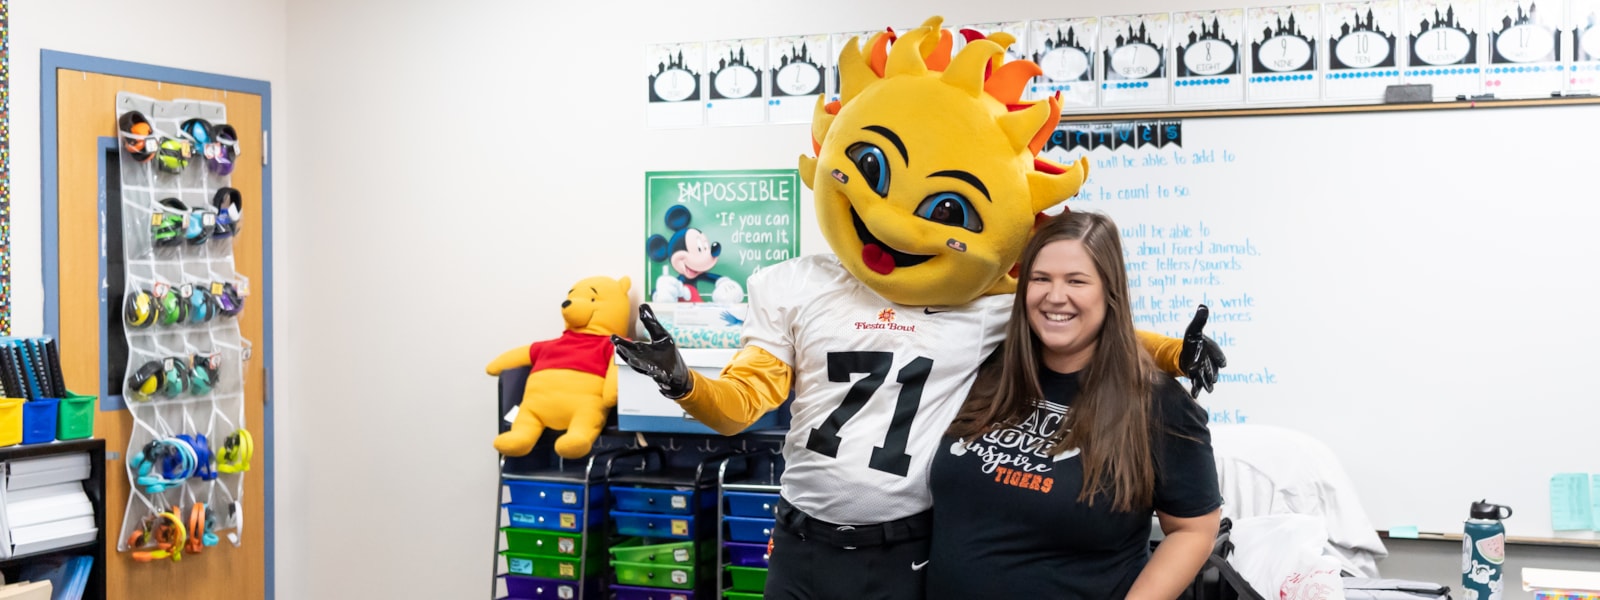 Mrs. Reagan with the Fiesta Bowl mascot.